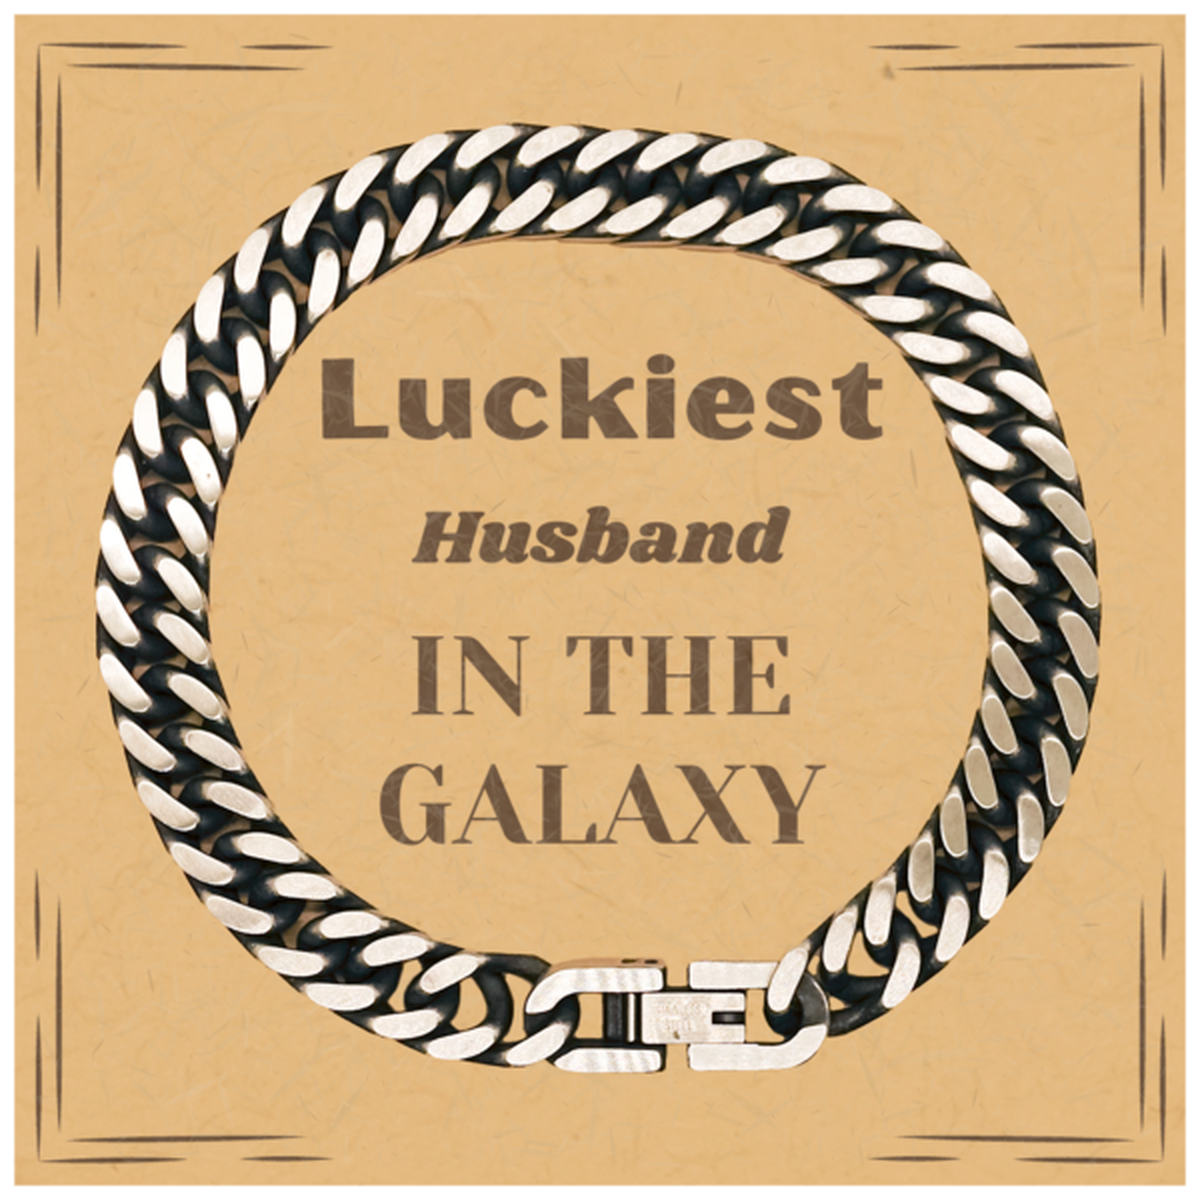 Luckiest Husband in the Galaxy, To My Husband Message Card Gifts, Christmas Husband Cuban Link Chain Bracelet Gifts, X-mas Birthday Unique Gifts For Husband Men Women